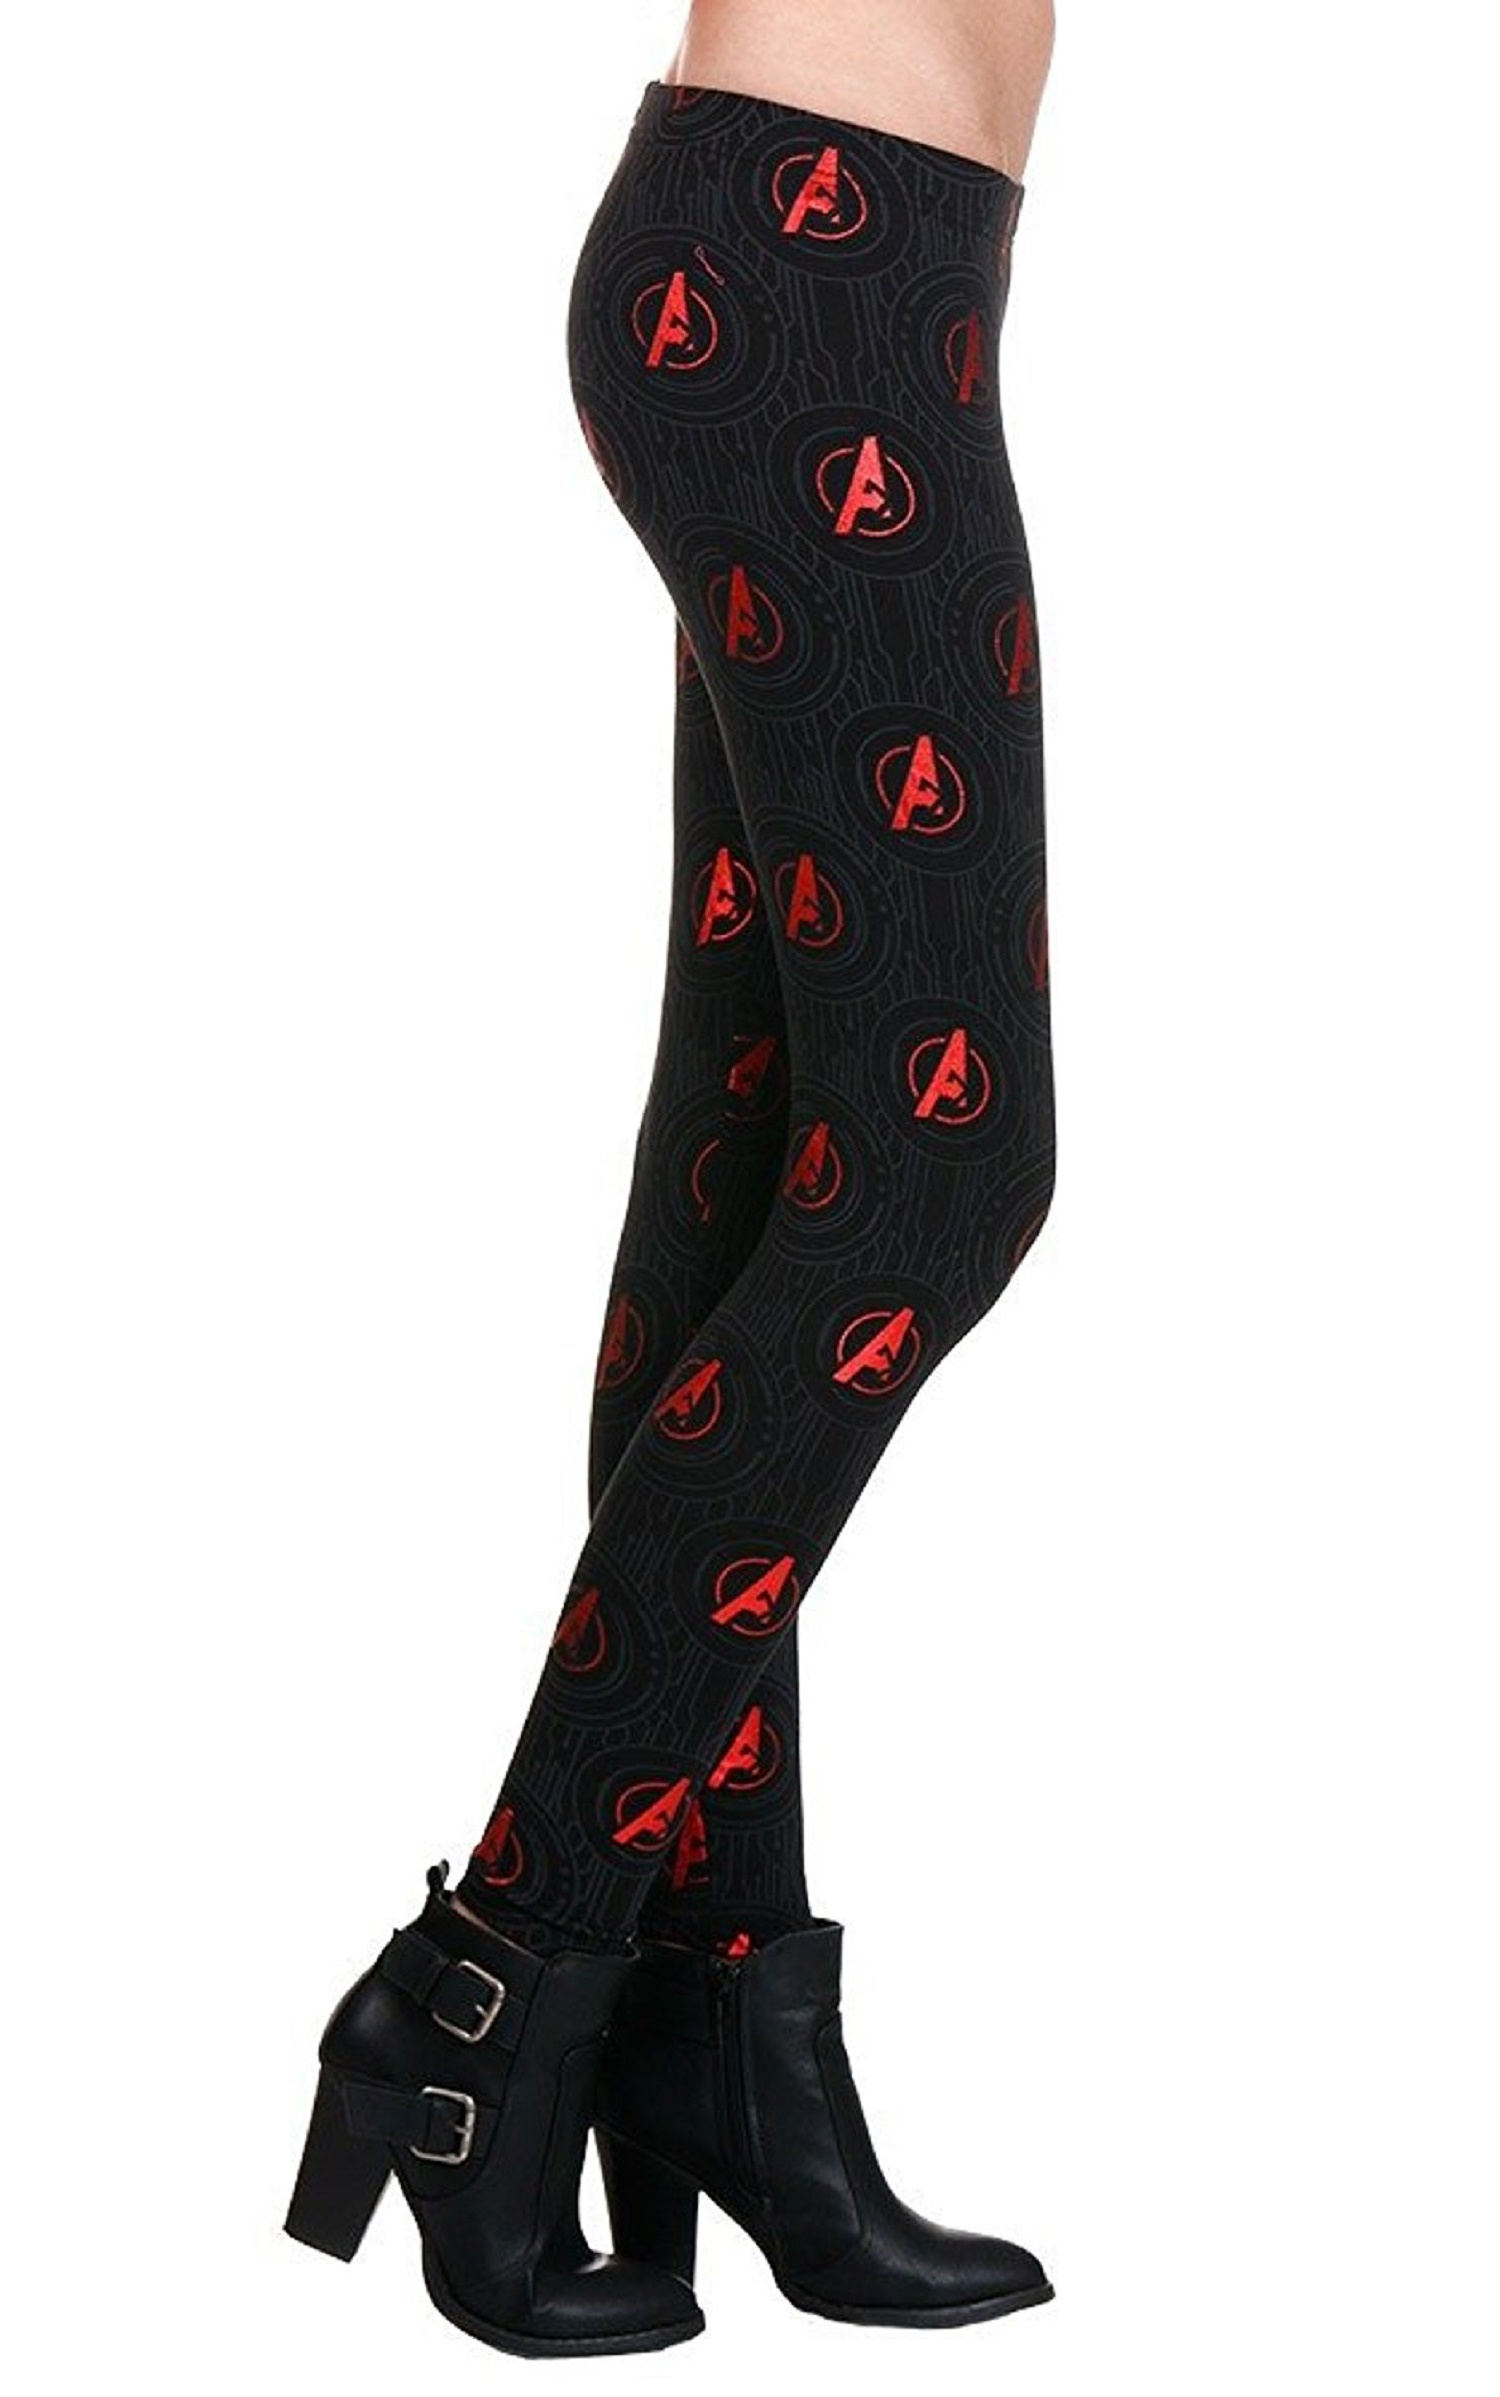 Officially Licensed Marvel Avengers Age of Ultron Symbol Ankle-Length Teen Juniors Leggings (Size Large) - image 3 of 4